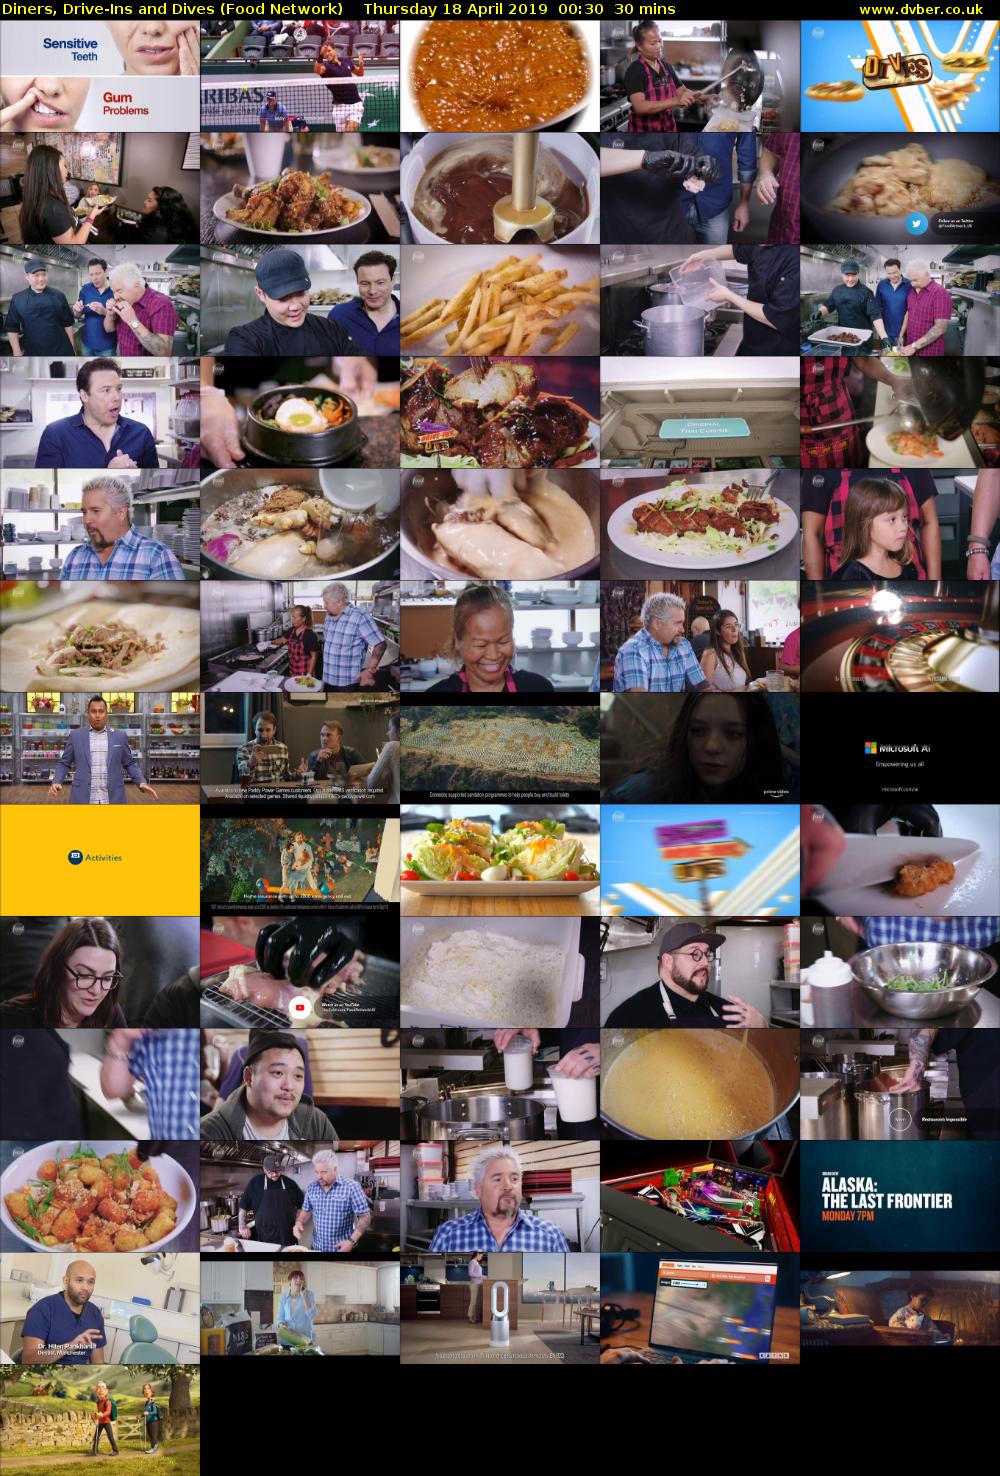 Diners, Drive-Ins and Dives (Food Network) Thursday 18 April 2019 00:30 - 01:00